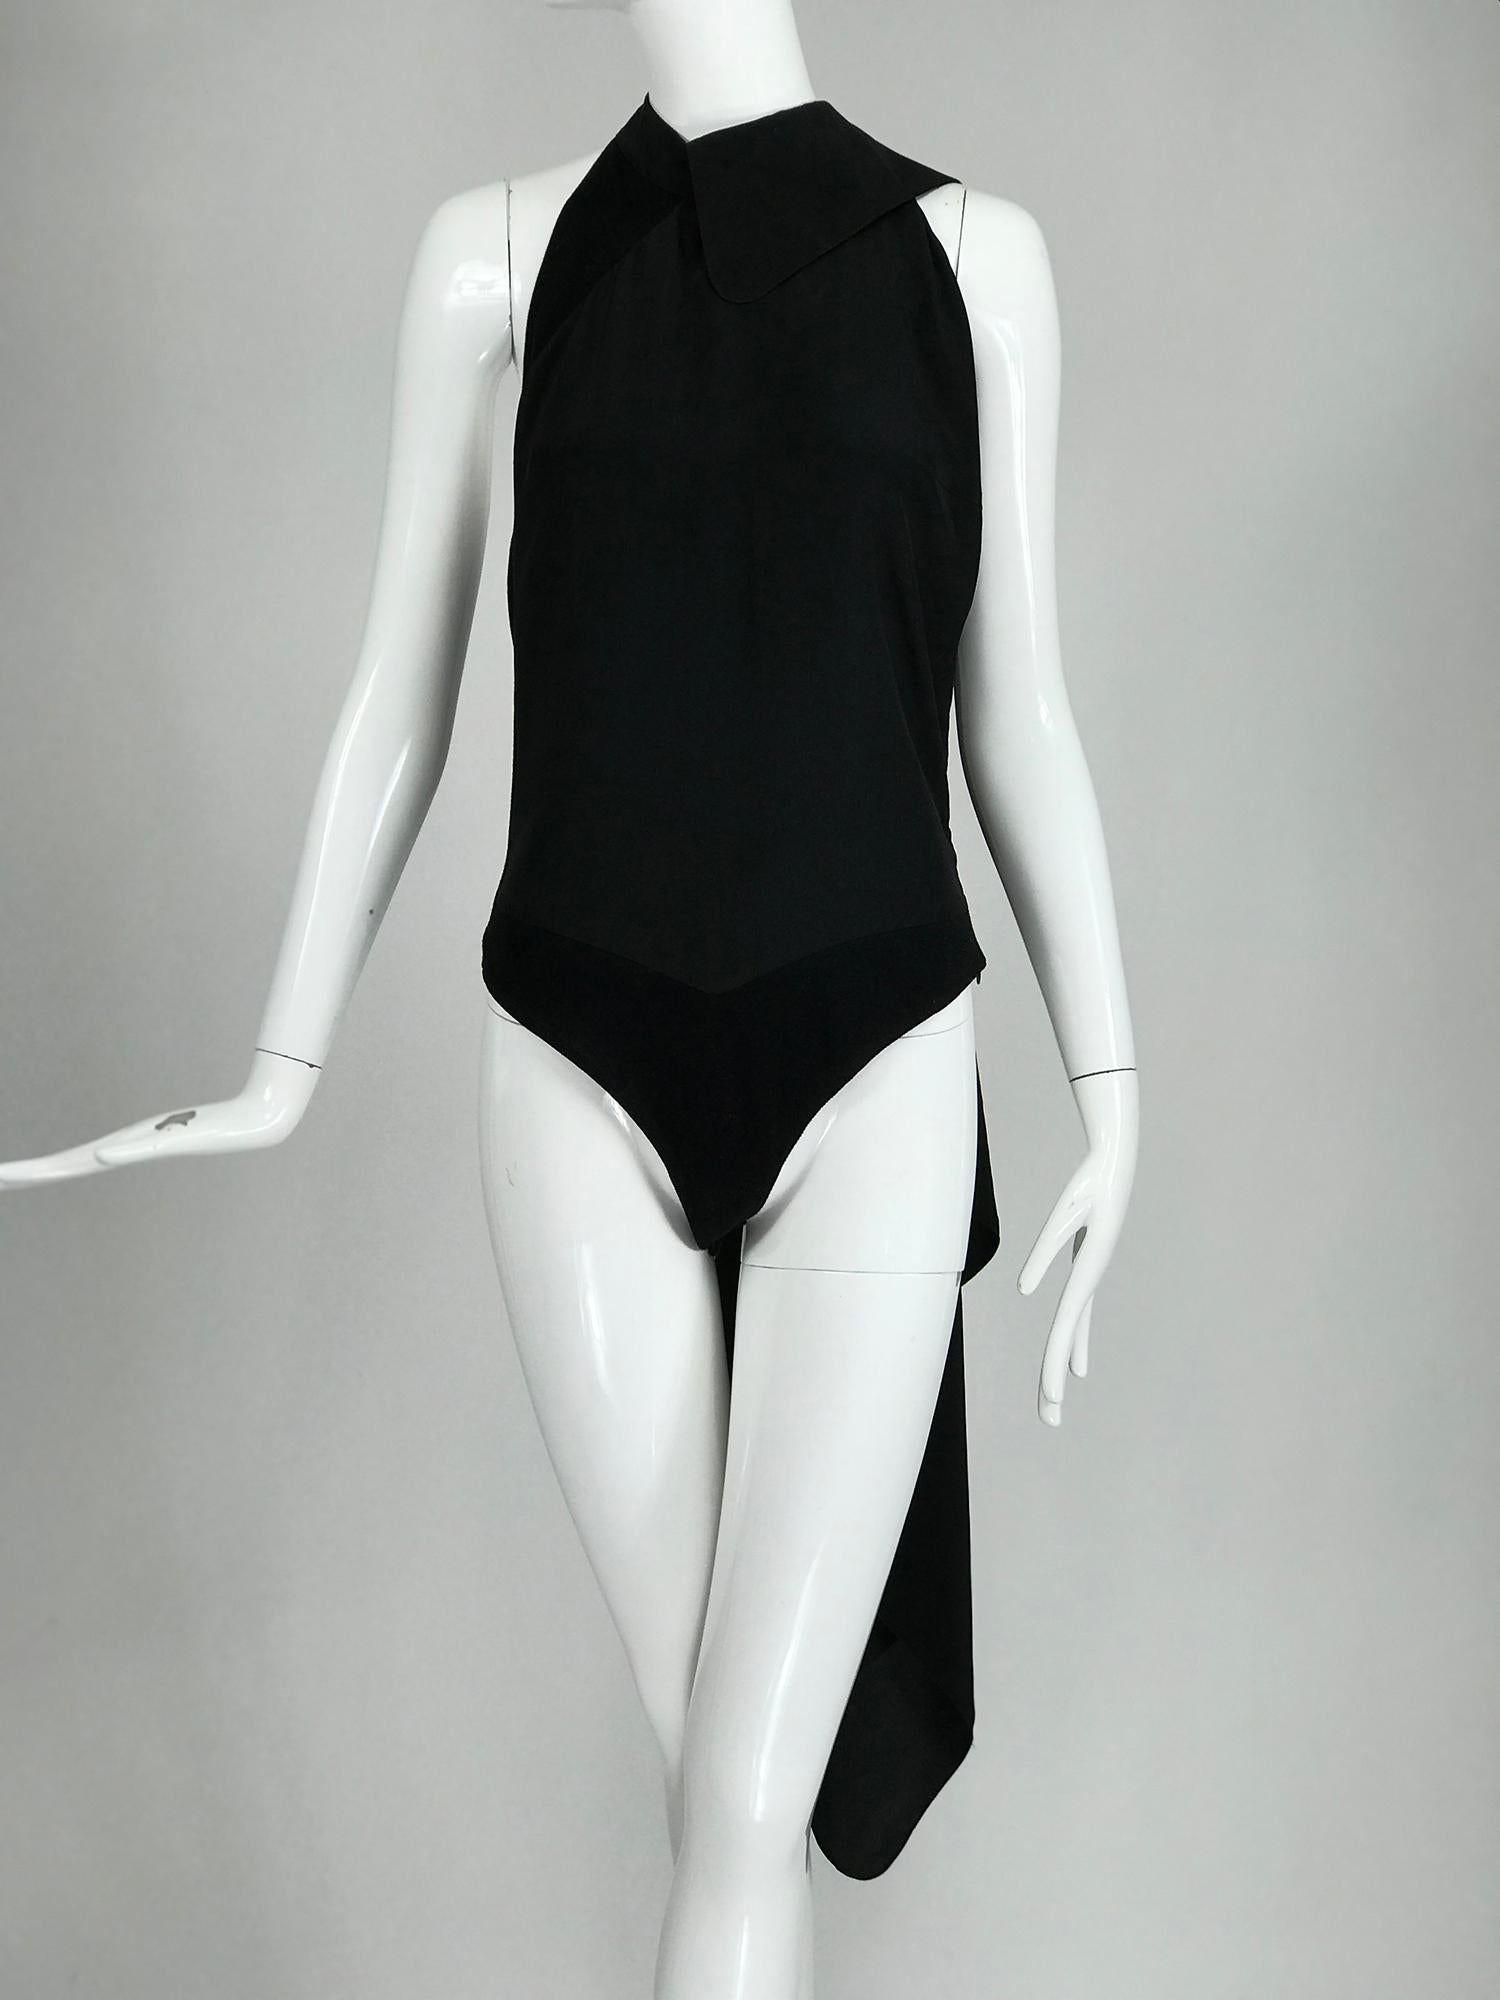 Gianfranco Ferre Black Silk and Sweater Knit Body Suit and Wrap or Drape 1980s For Sale 4